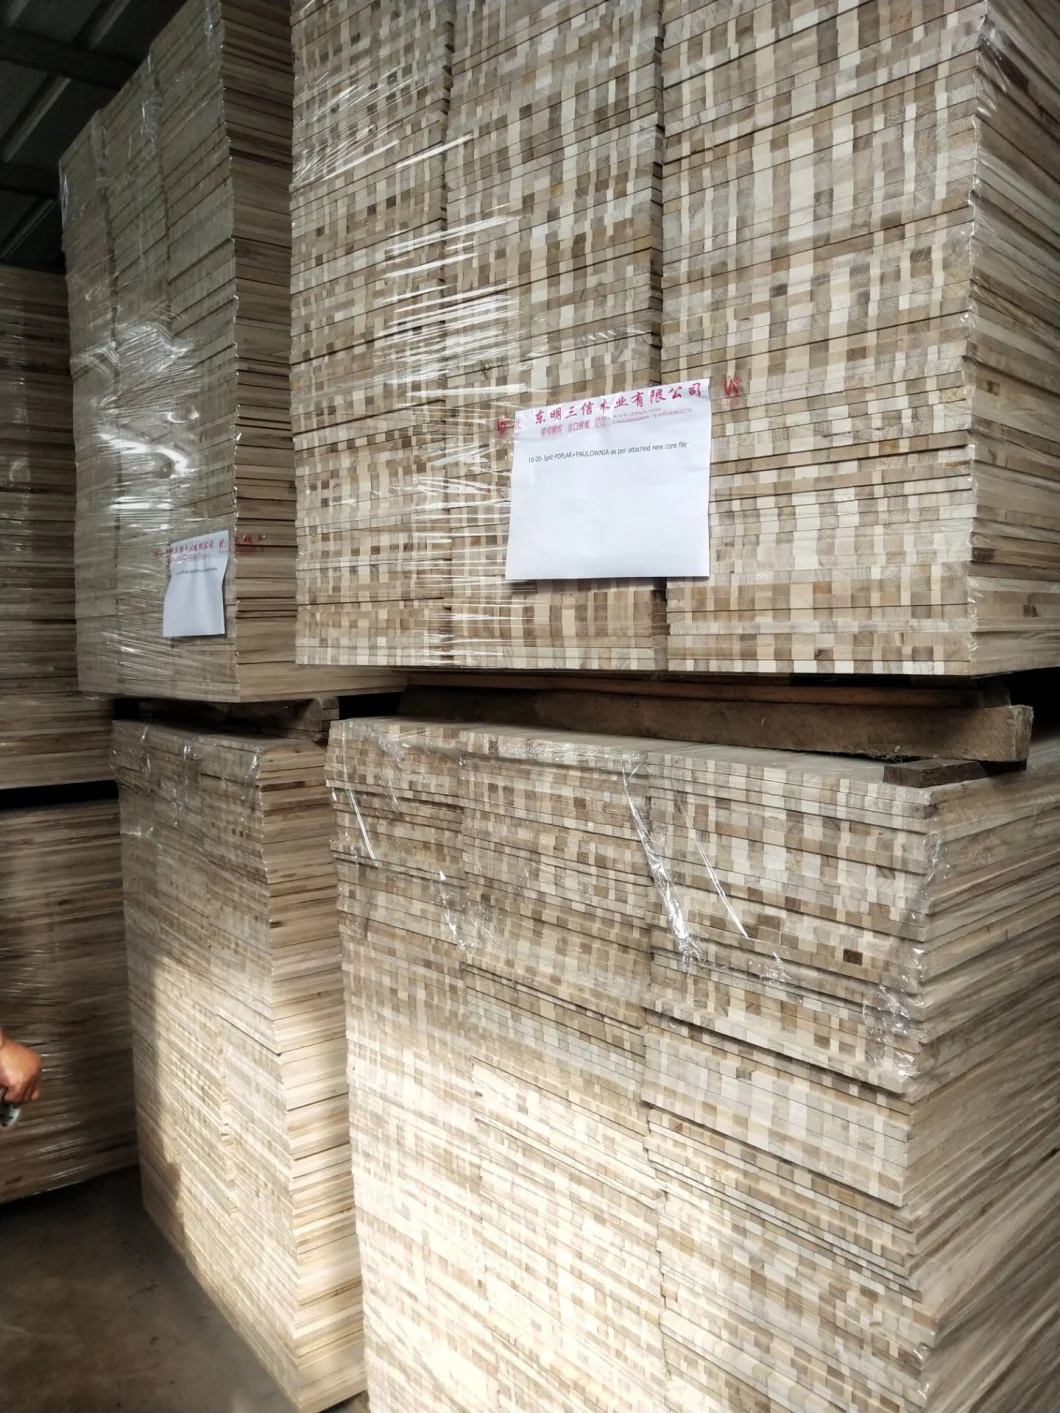 Solid Wood Boards Type and Paulownia Timber Type Wood Board